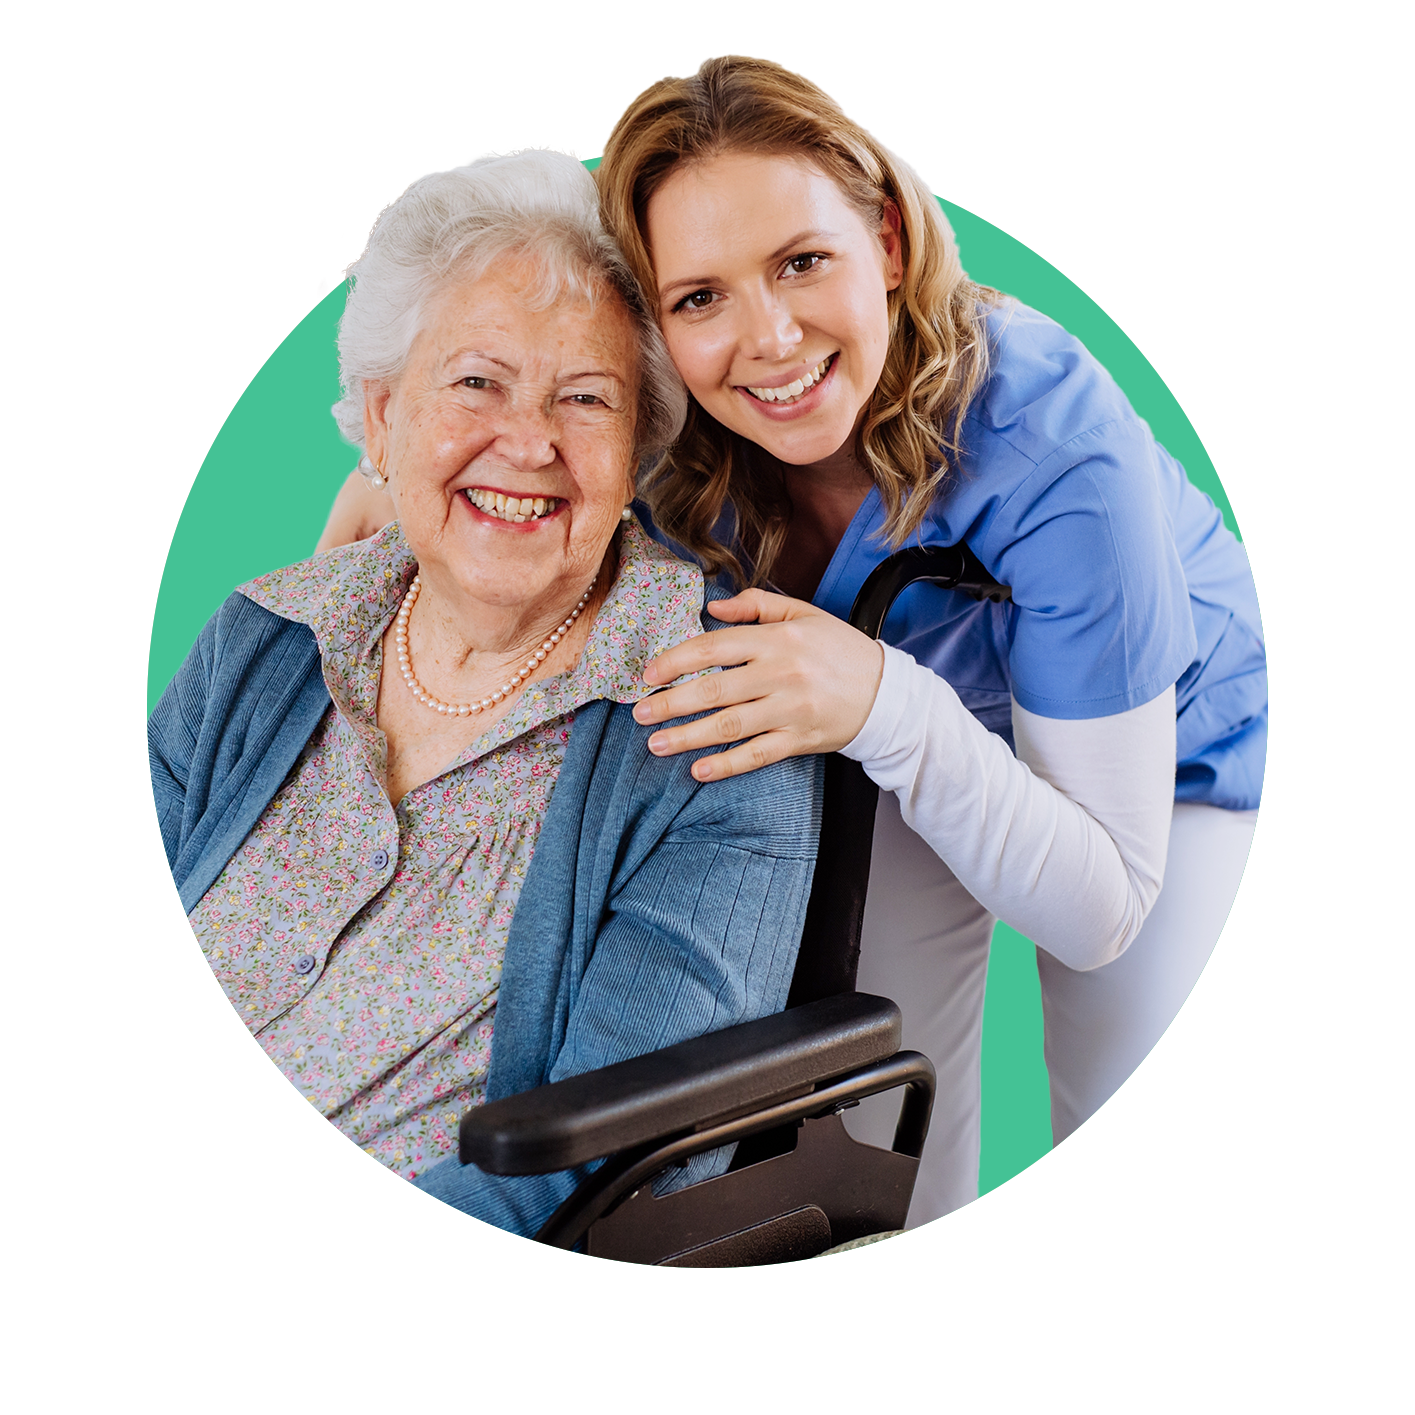 Elder woman in a wheelchair with nurse behind her both smiling towards the camera